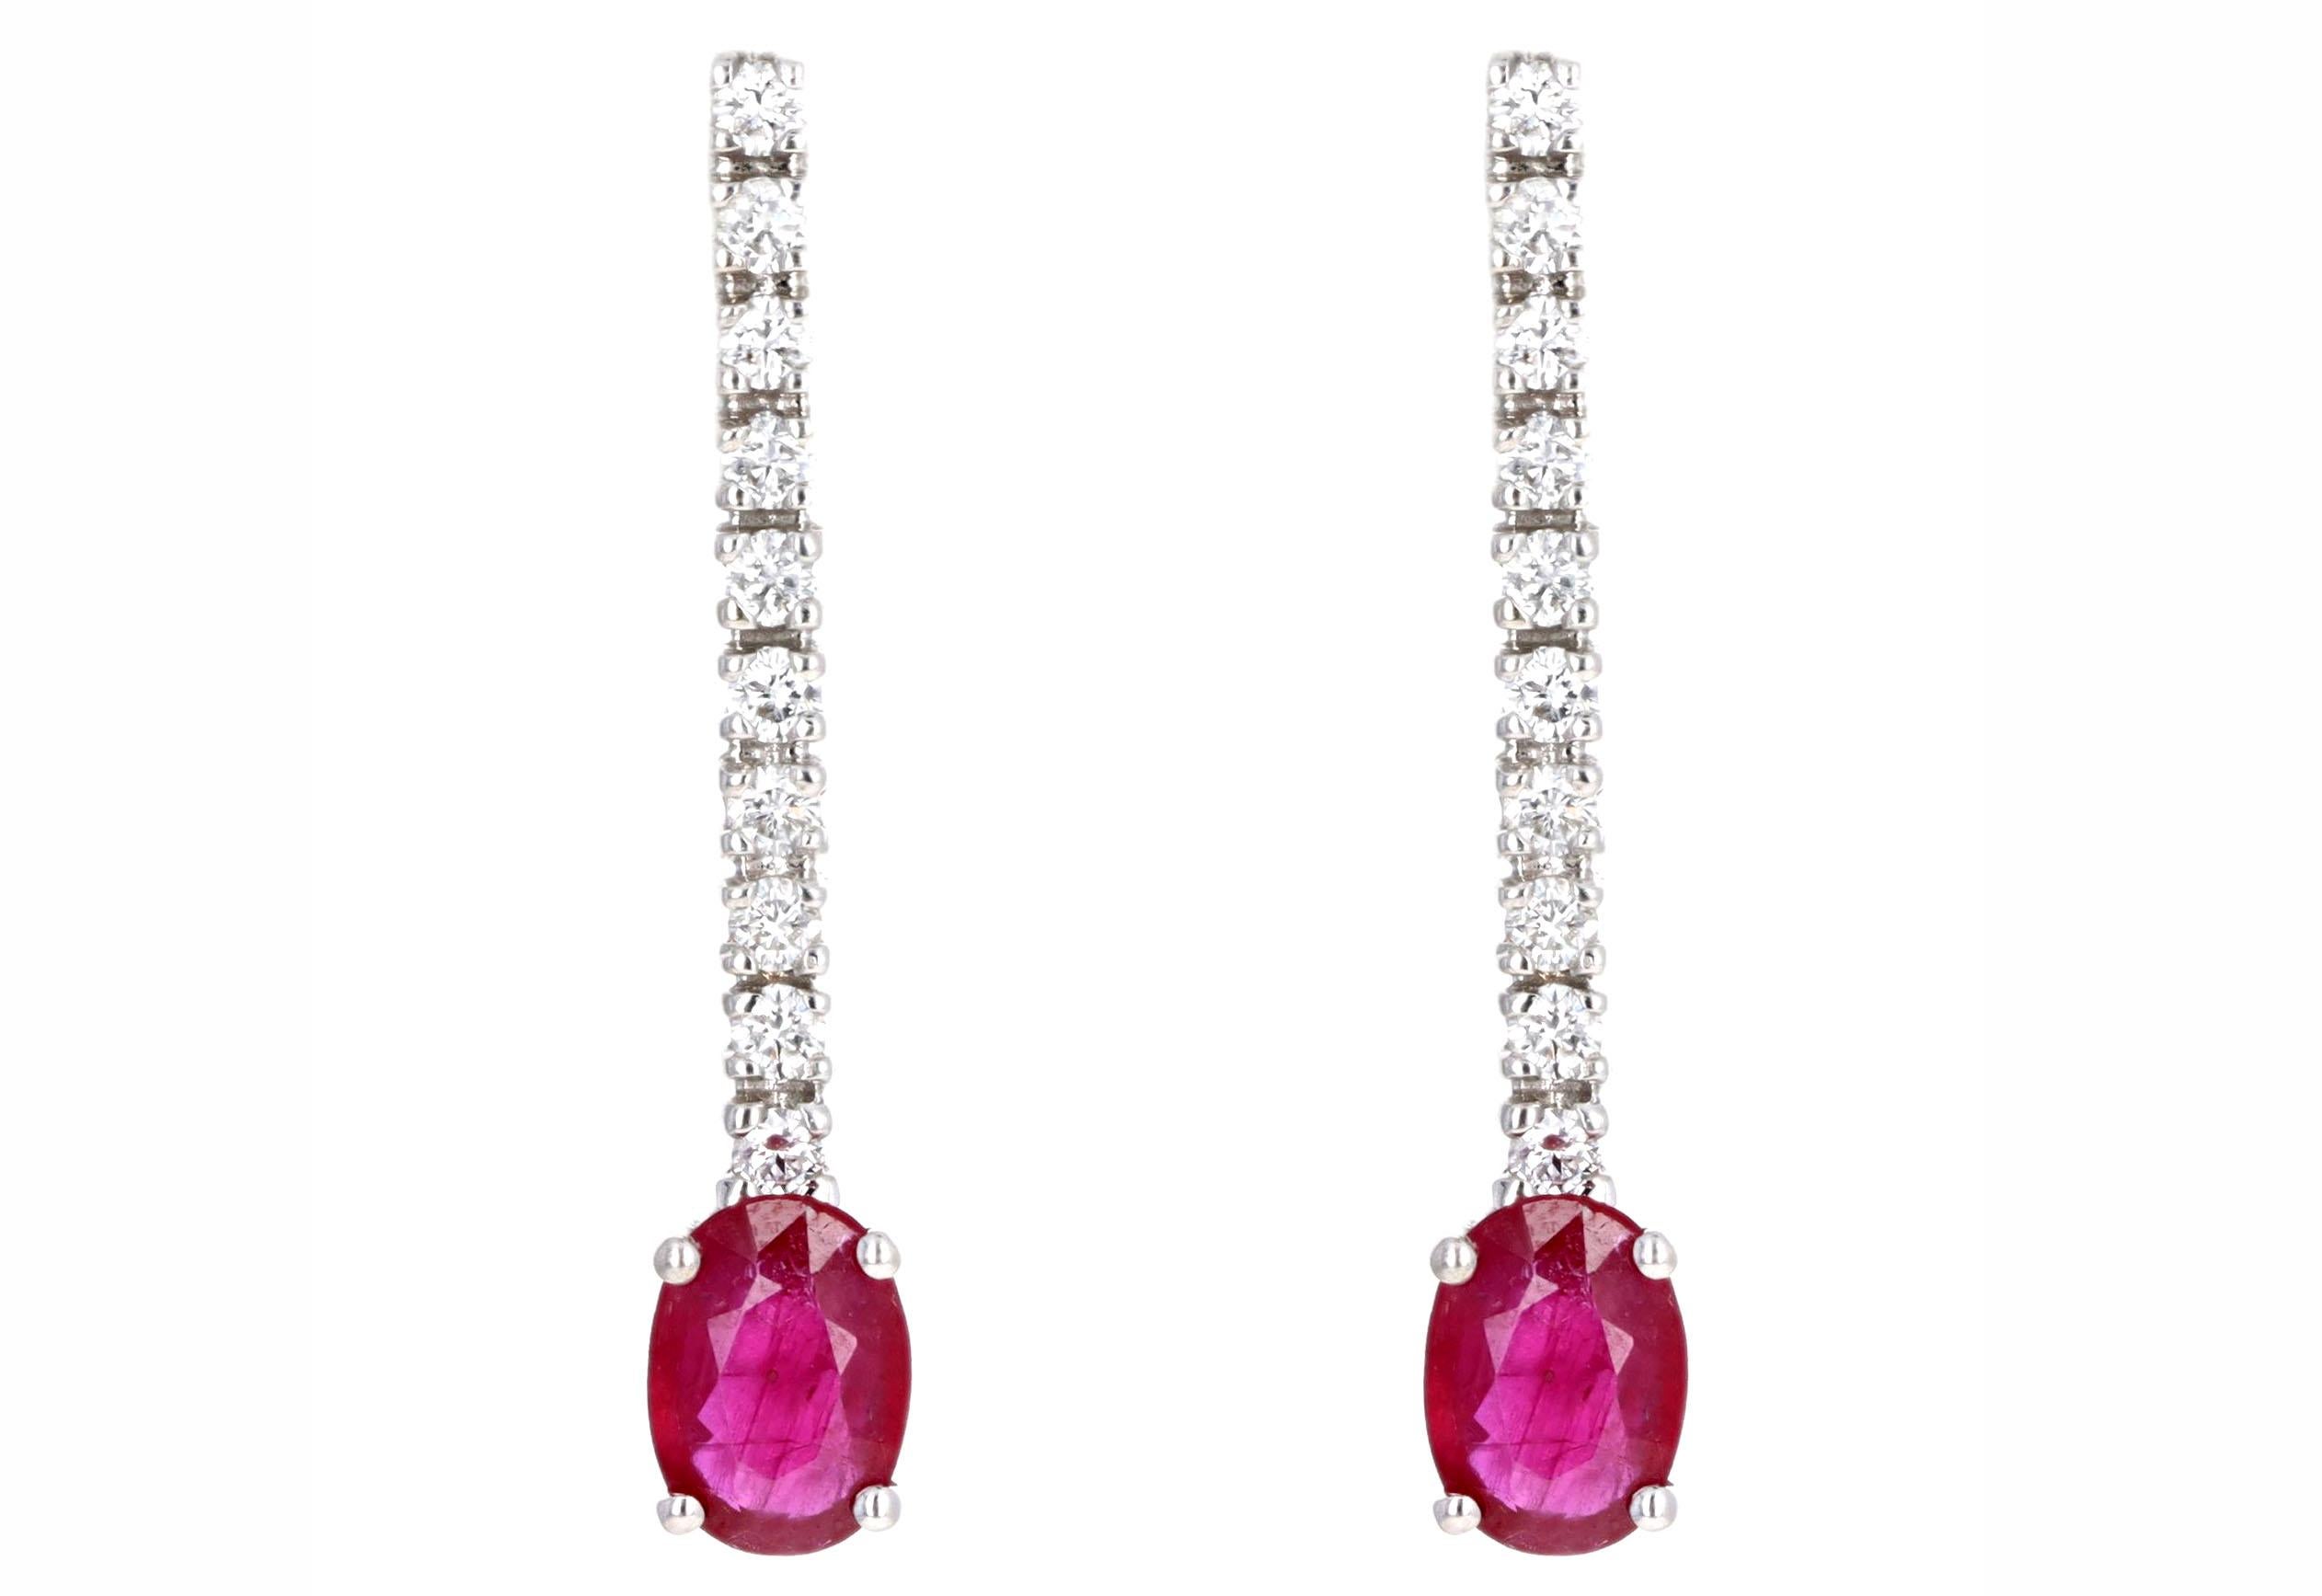 Era: Modern Estate

Composition: 14K White Gold

Primary Stone: Two Oval Cut Natural Rubies

Carat Weight: Approximately 1.80 Carats in Total

Accent Stone: Twenty Round Brilliant Cut Diamonds

Carat Weight: Approximately 0.50 Carats in